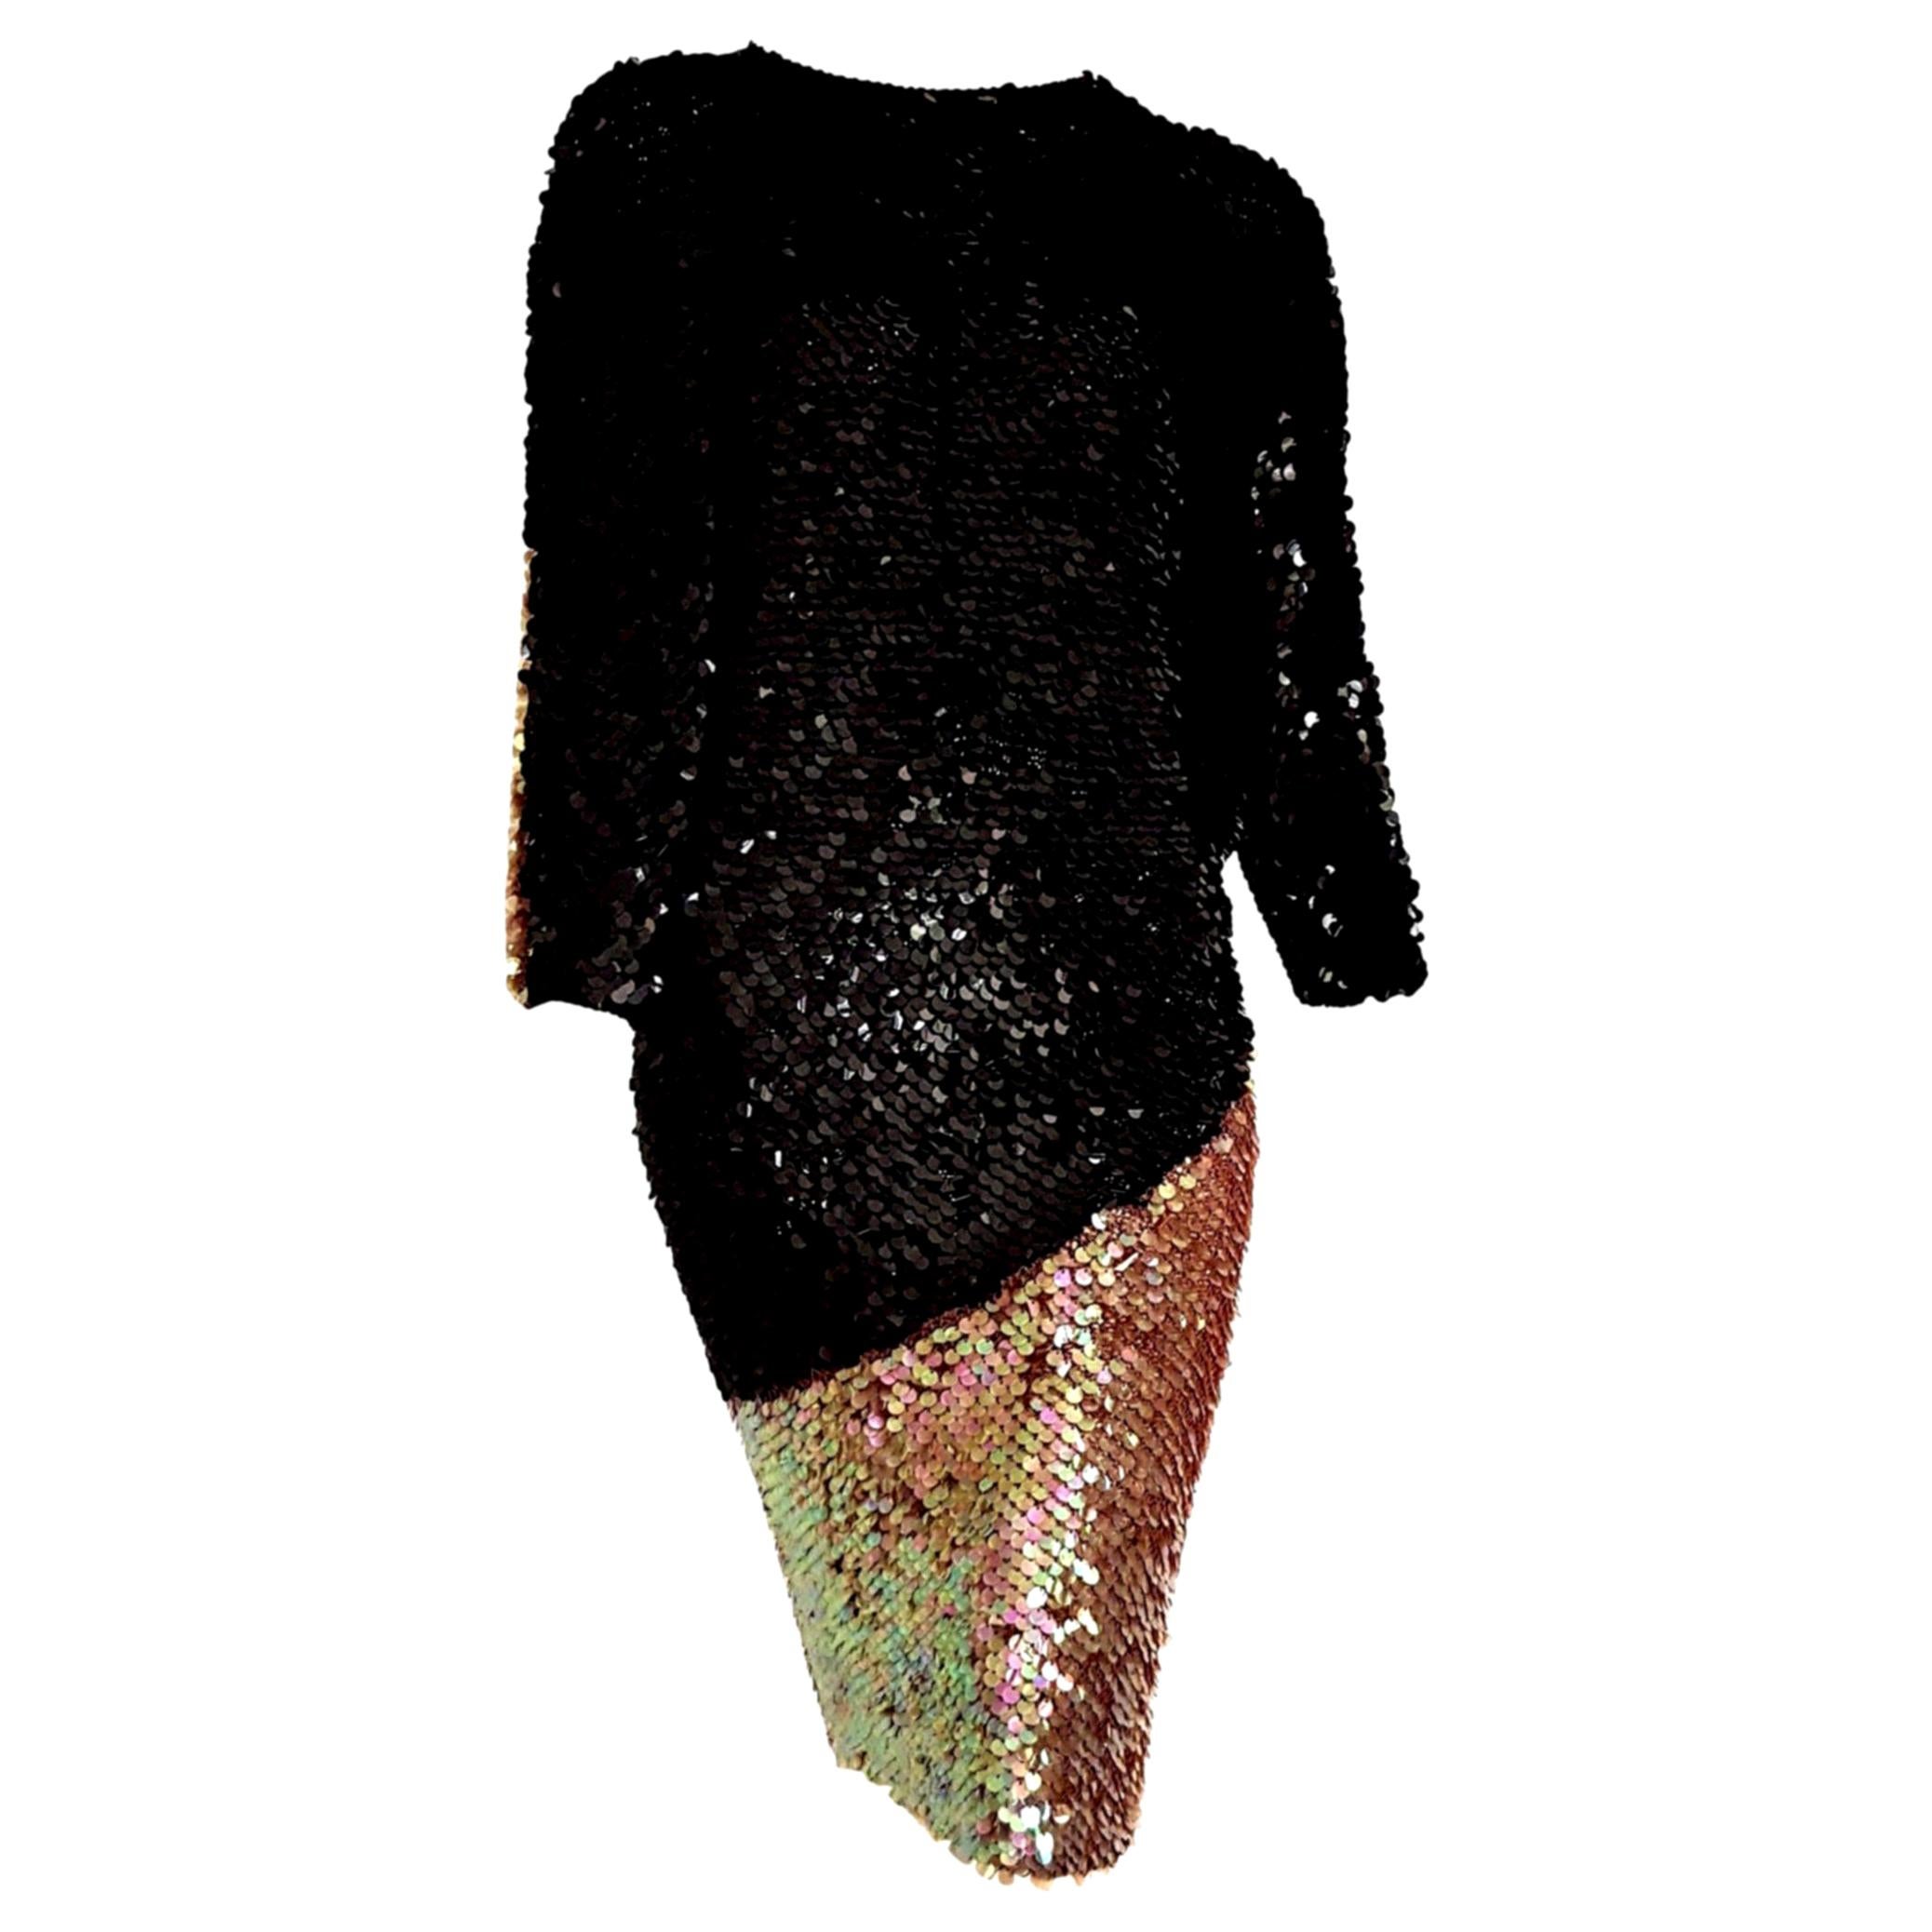 CHANEL "New" Haute Couture Swarovski Sequins on Knit Black Pearl dress - Unworn For Sale